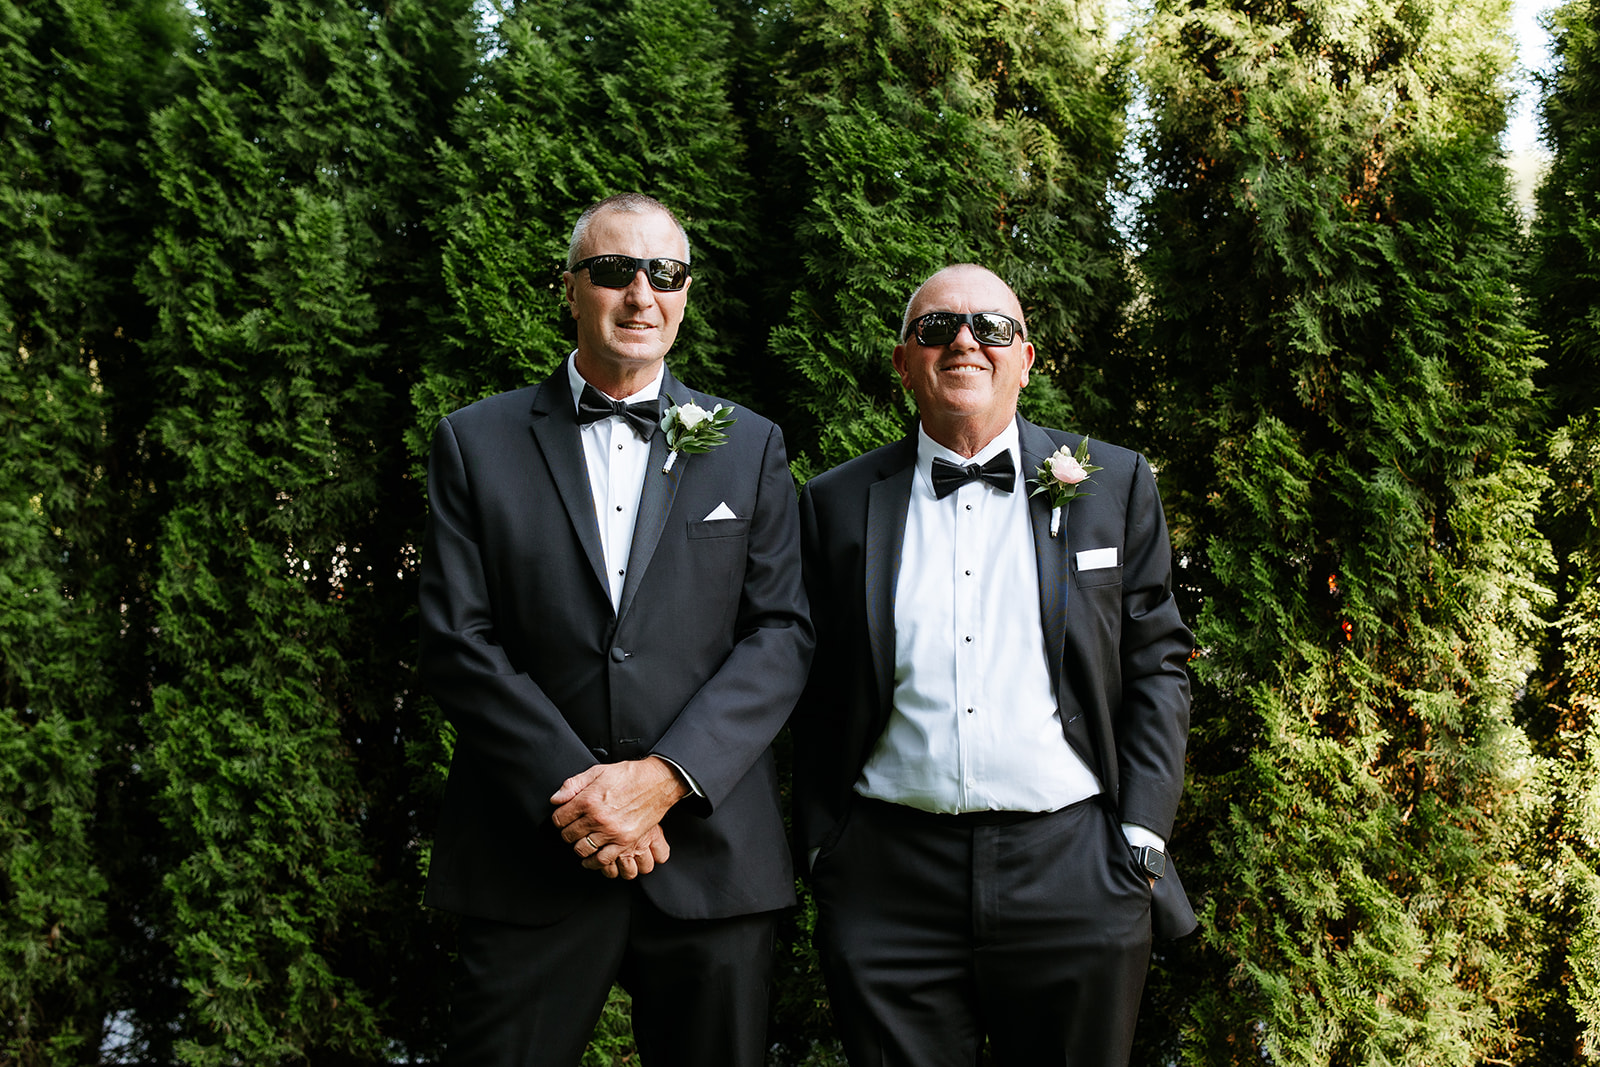 Two men in tuxedos with boutonnieres and sunglasses standing in front of tall green hedges.